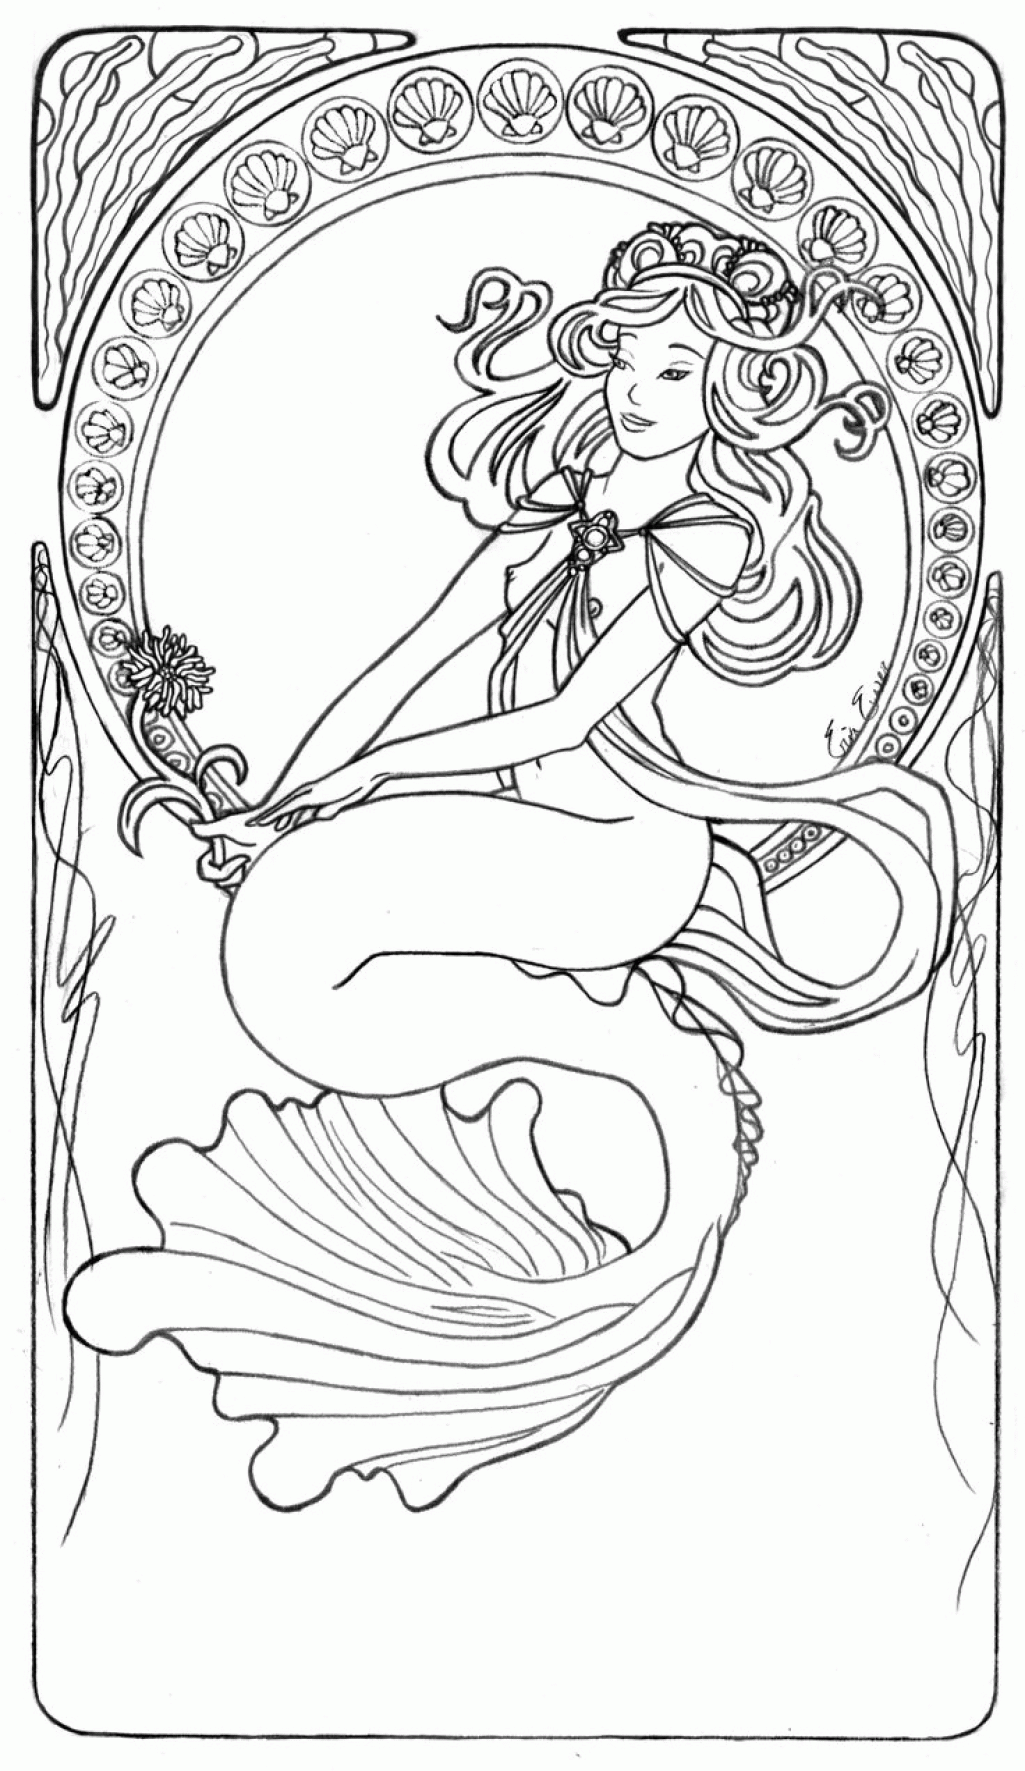 Free Coloring Pages Printable For Adults Coloring Page Staying ...